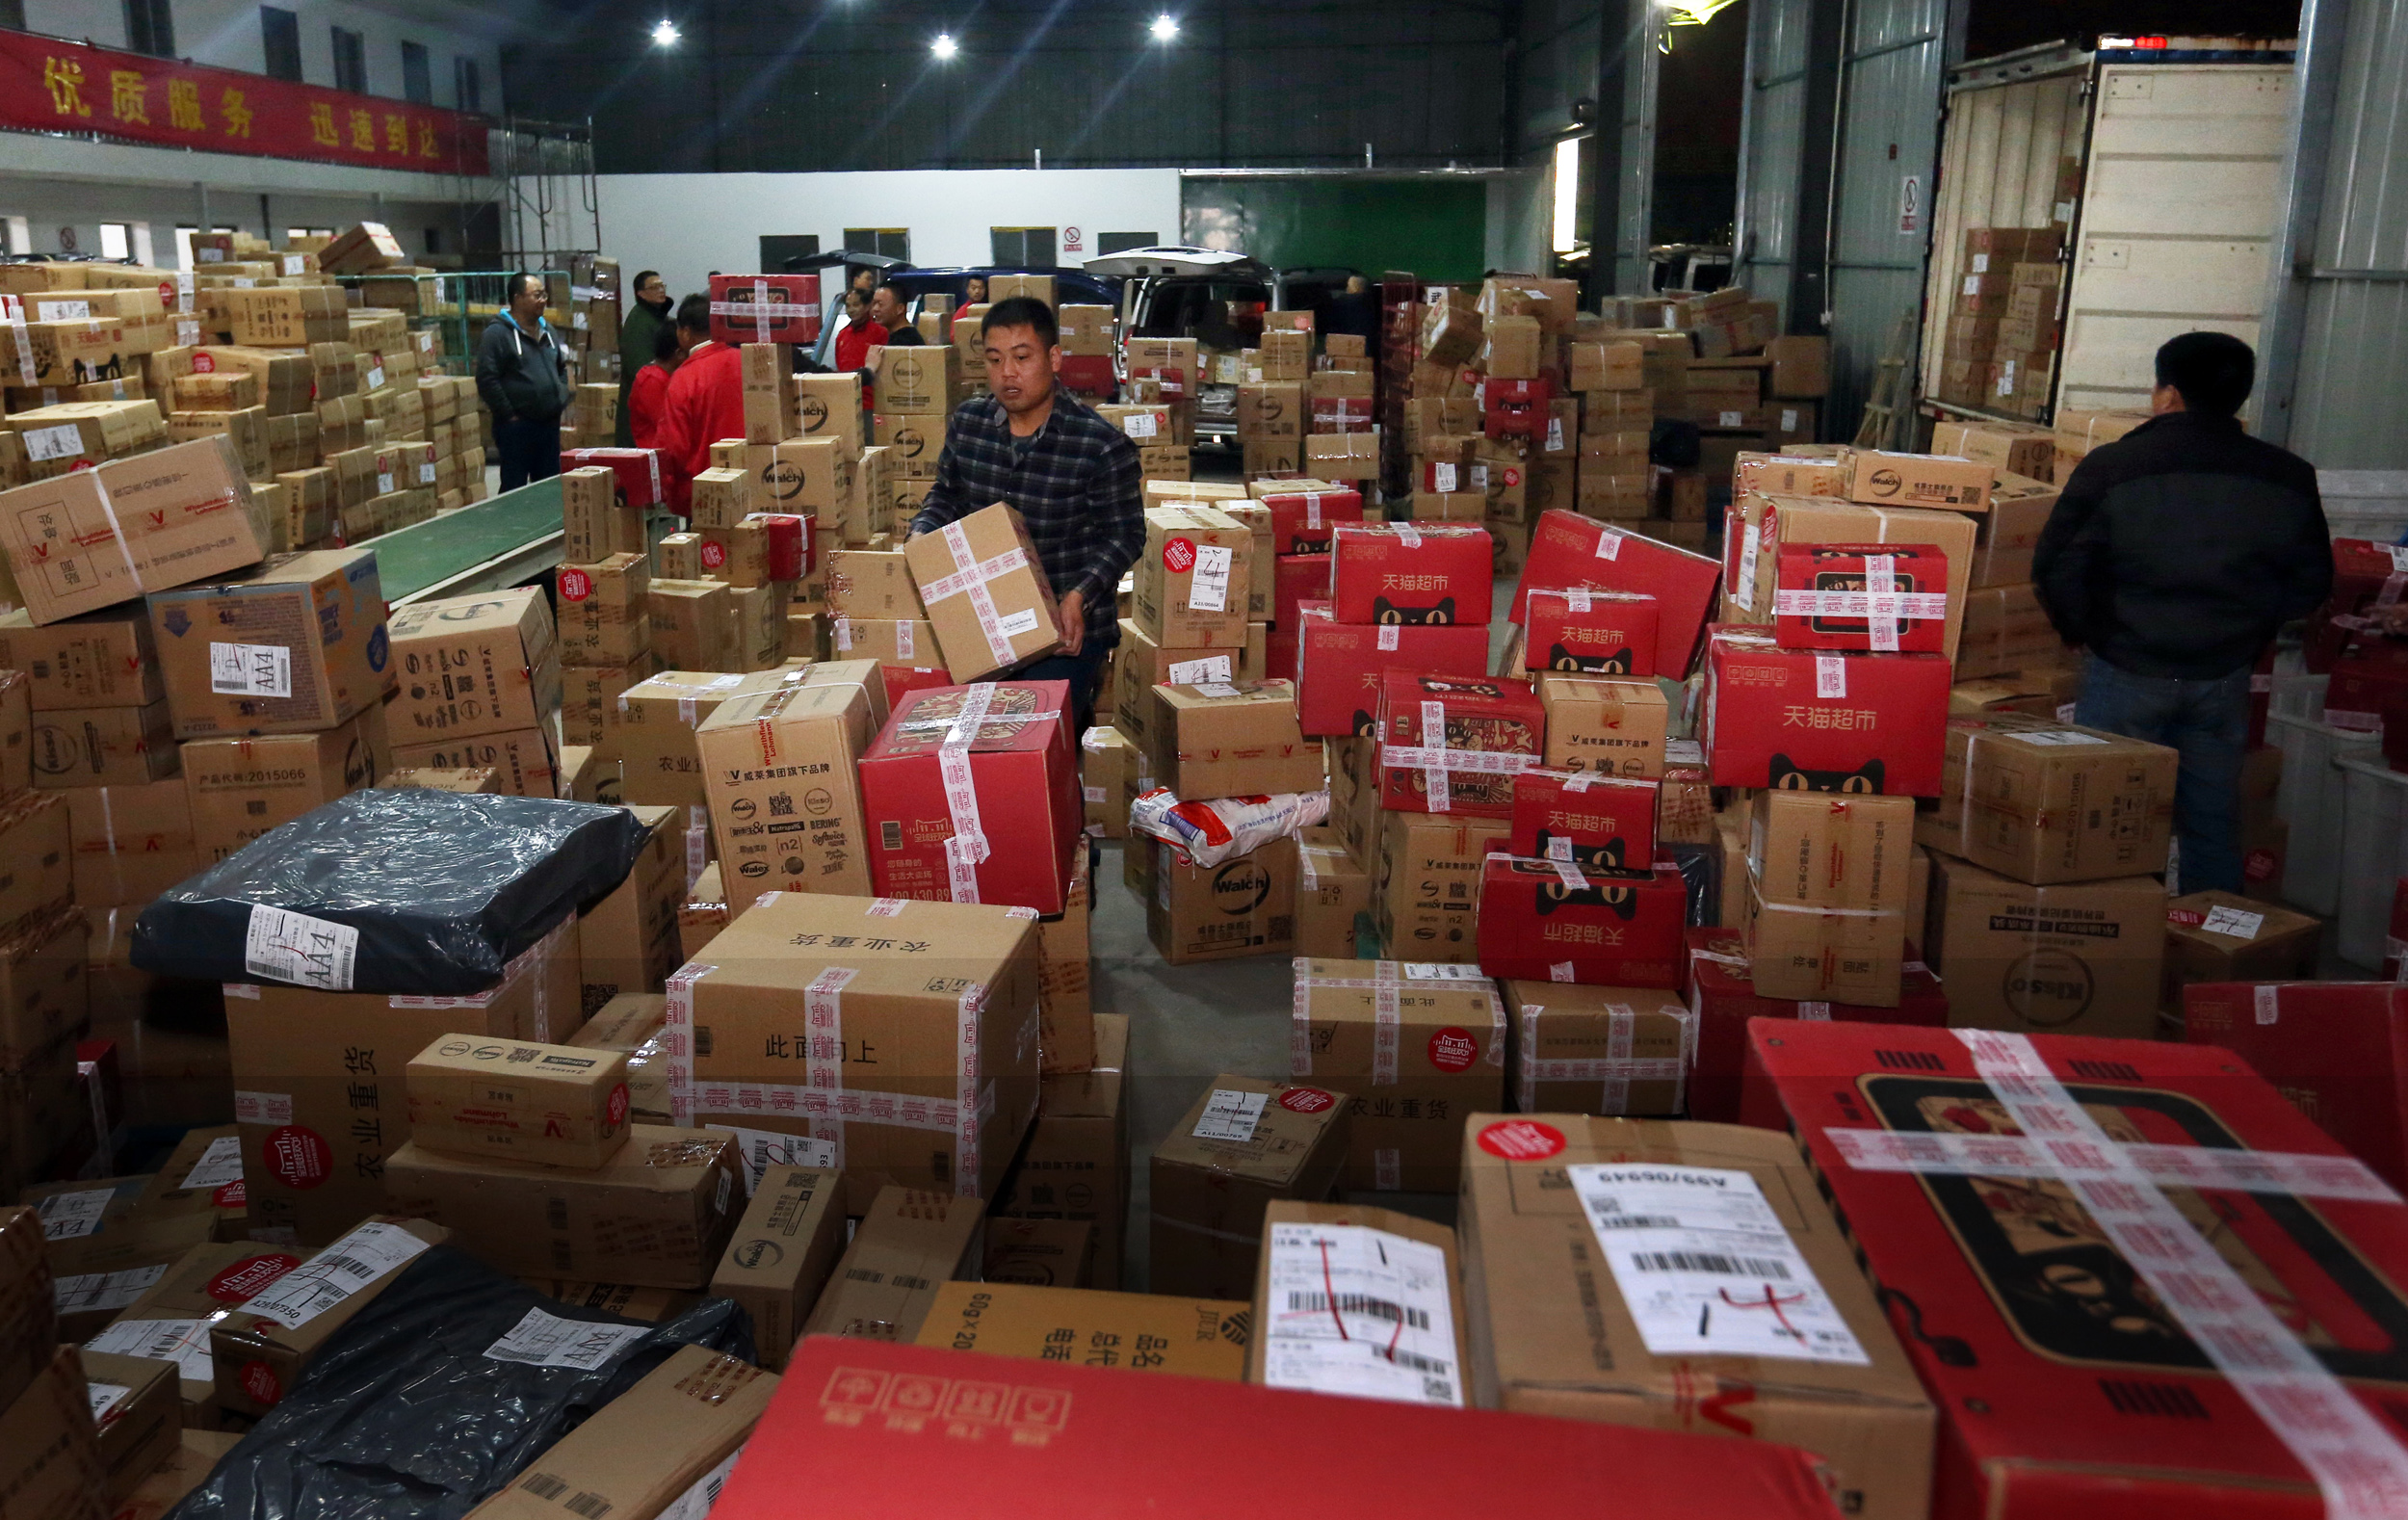 (151113) -- CHANGZHOU, Nov. 13, 2015 (Xinhua) -- Staff members of an express company sort out packages in Changzhou, east China's Jiangsu Province, Nov. 13, 2015.  It is anticipated that China's express industry would deliver 780 million mails and packages during Nov. 11-16 period, an increas of 45 percent year on year, according to monitoring data released by China's State Post Bureau. Alibaba's Singles Day online shopping spree on Nov. 11 has triggered an upsurge of internet transaction. (Xinhua/Chen Wei) (lfj)